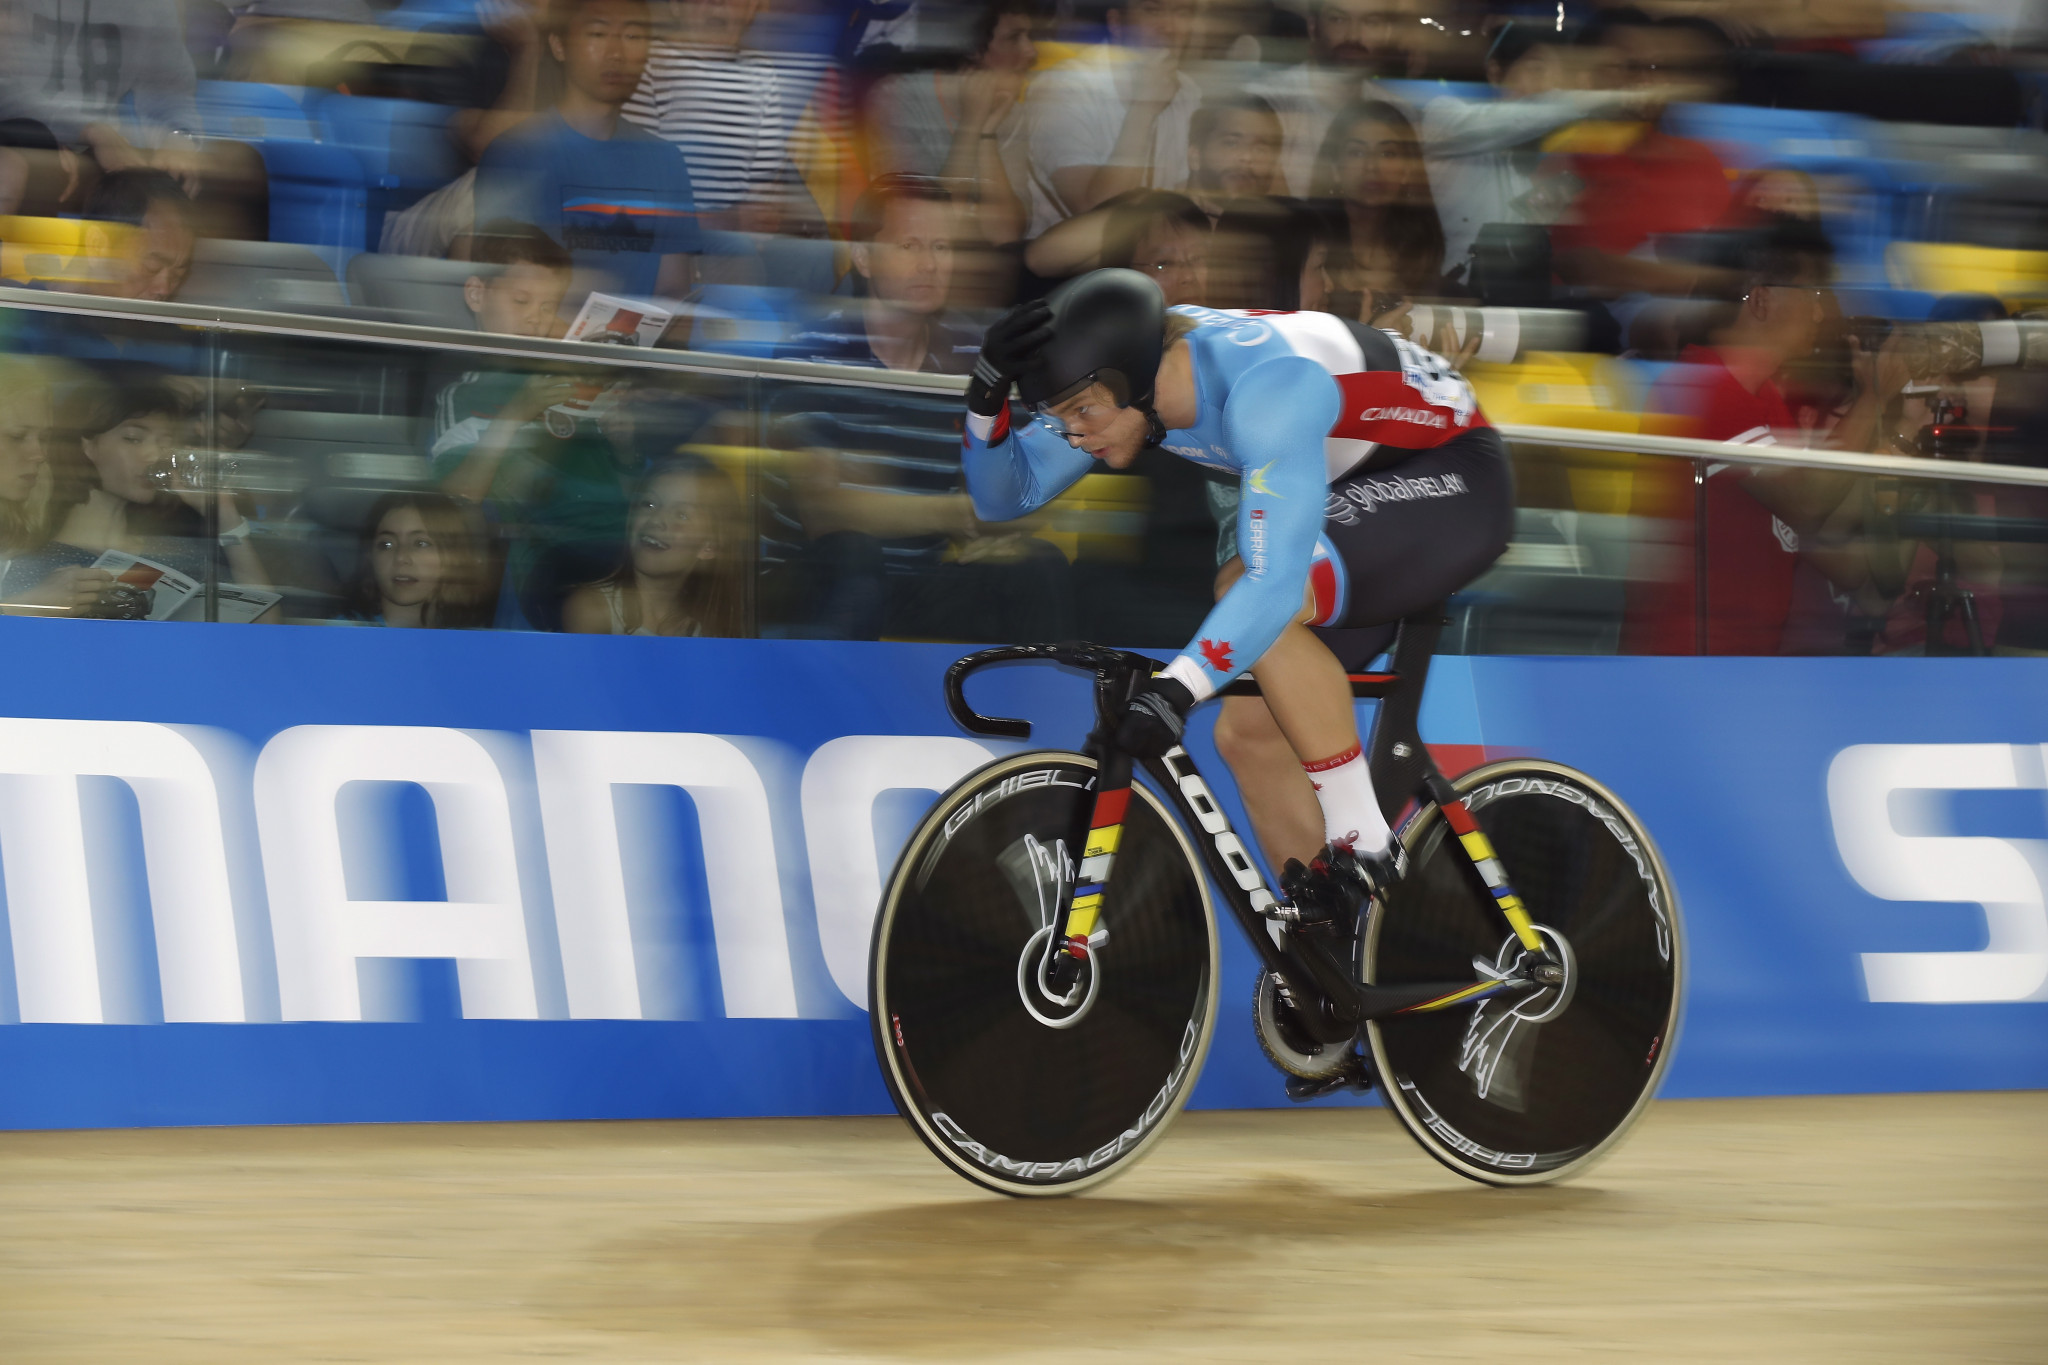 Milton to stage third UCI Track Cycling World Cup of season